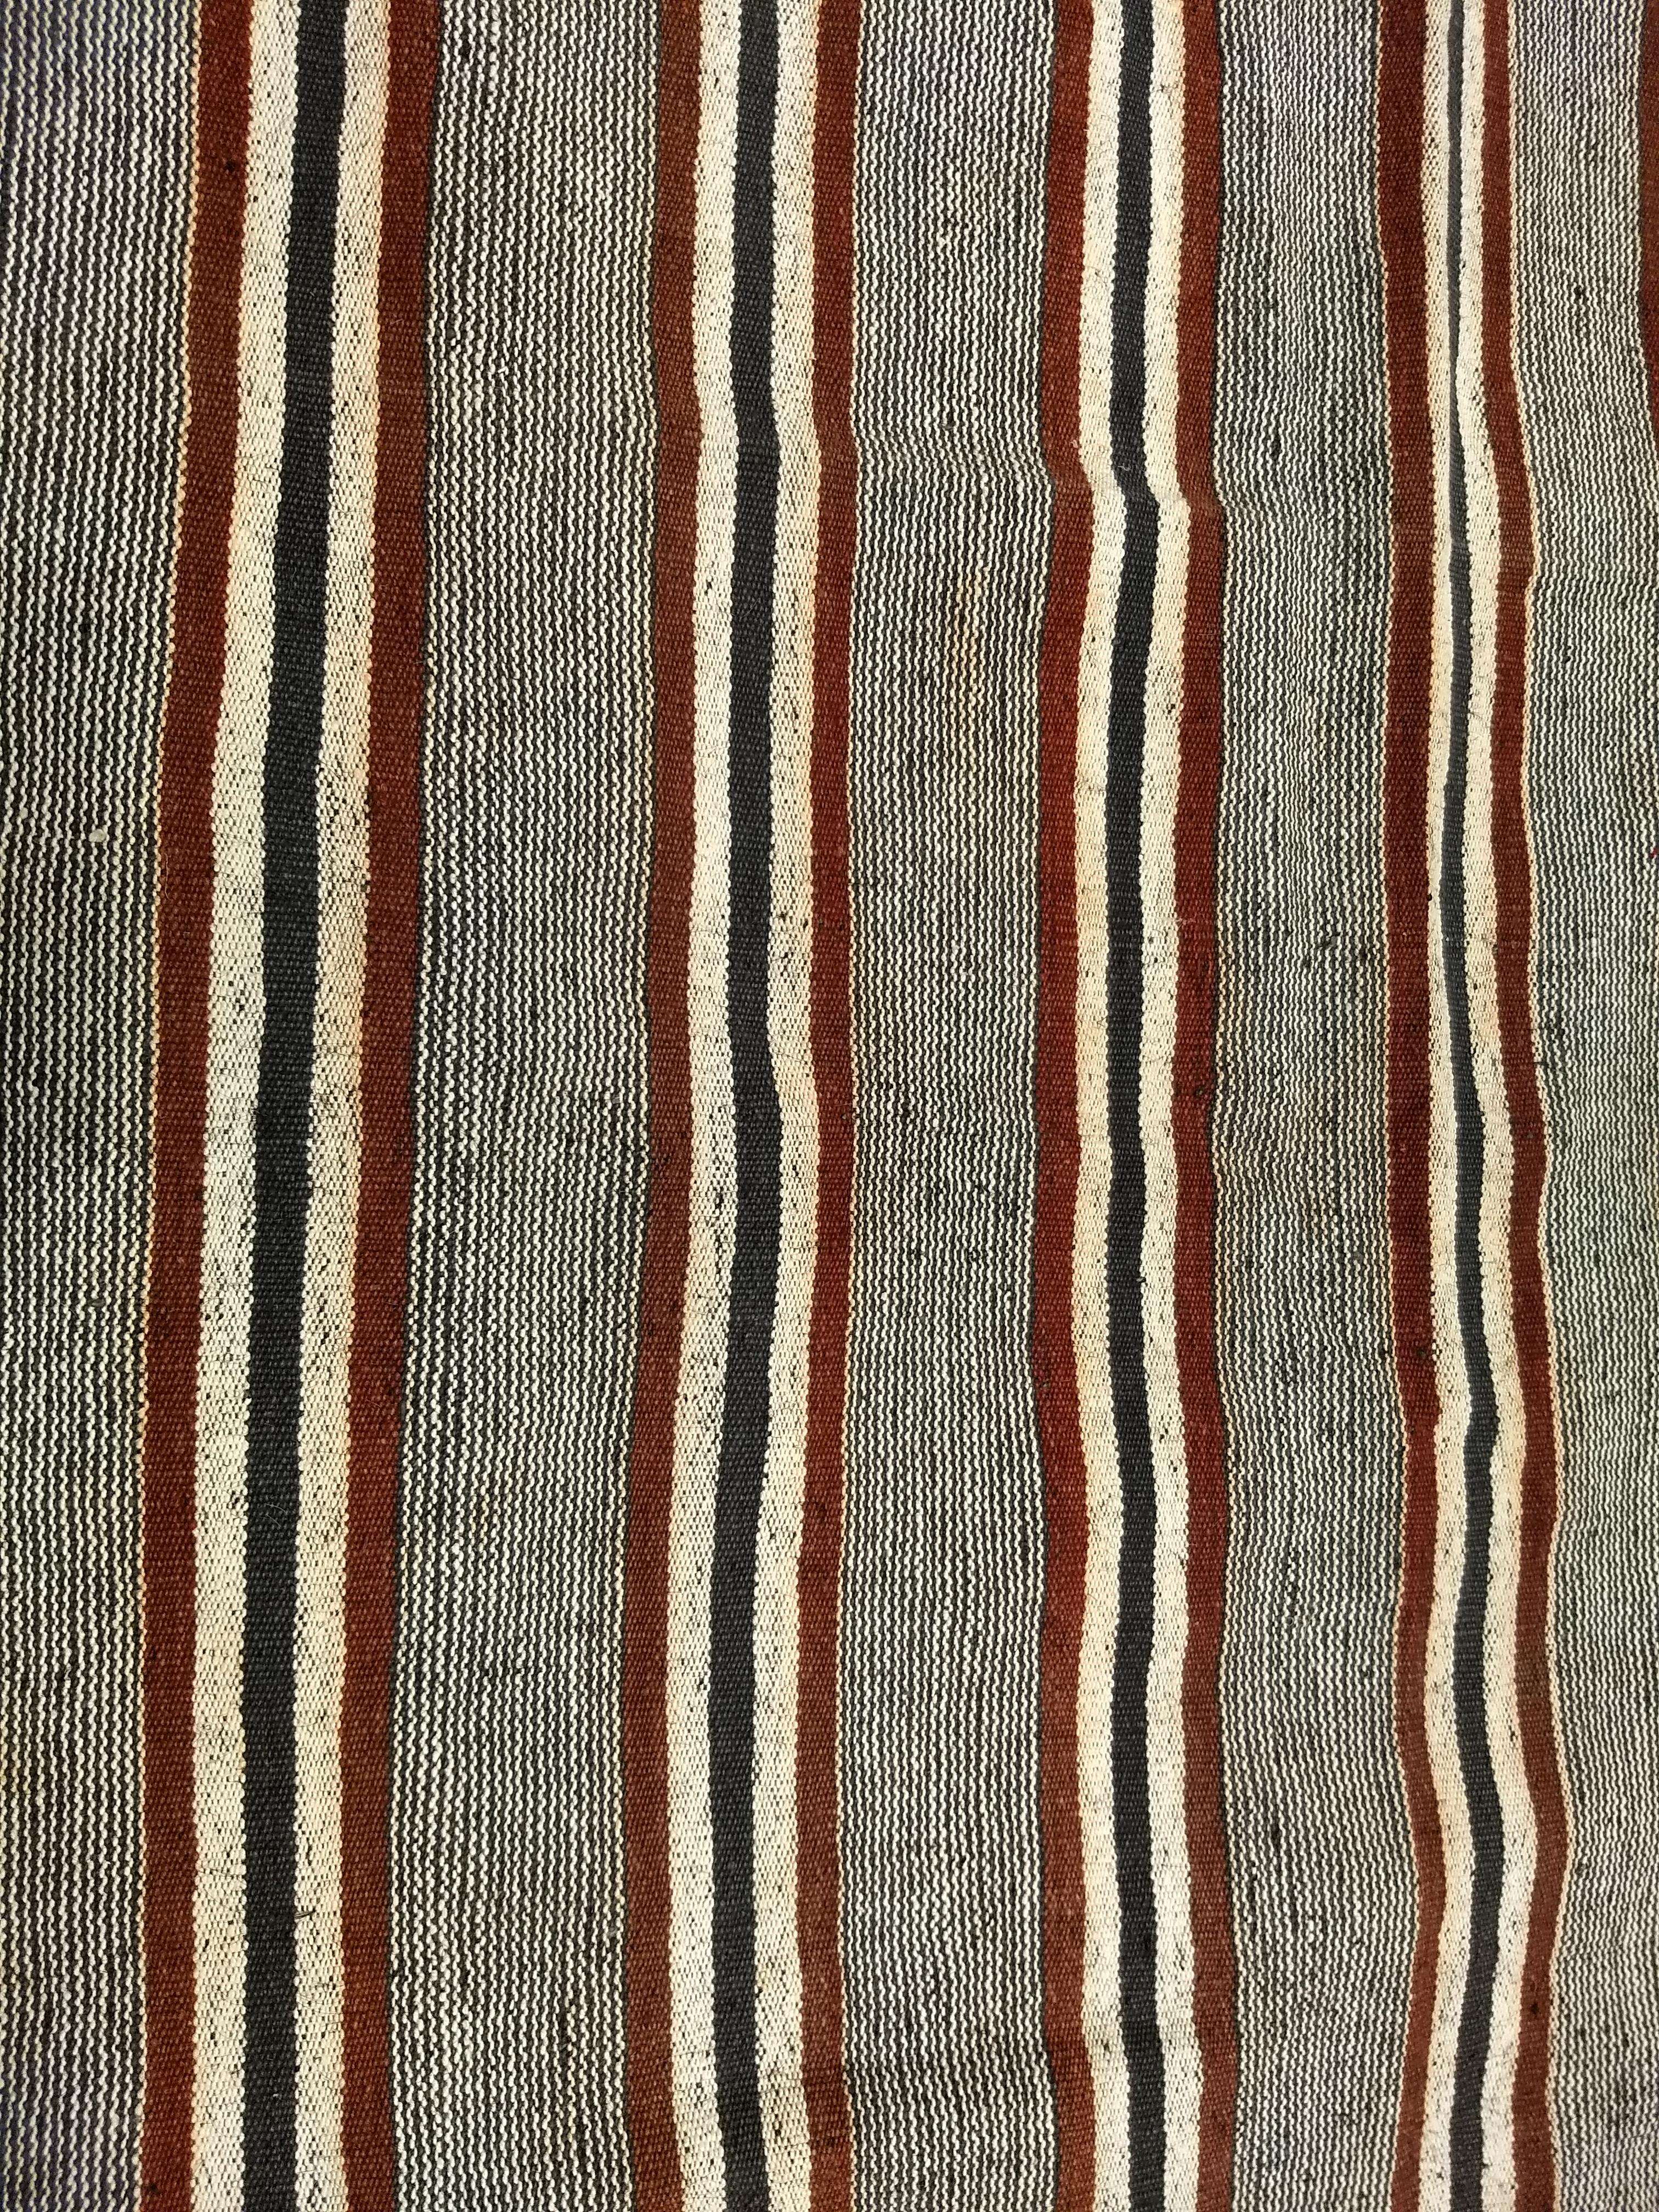 Vegetable Dyed Vintage Turkish Kilim in Allover Stripe Pattern  in Gray, Ivory, Black, Maroon For Sale